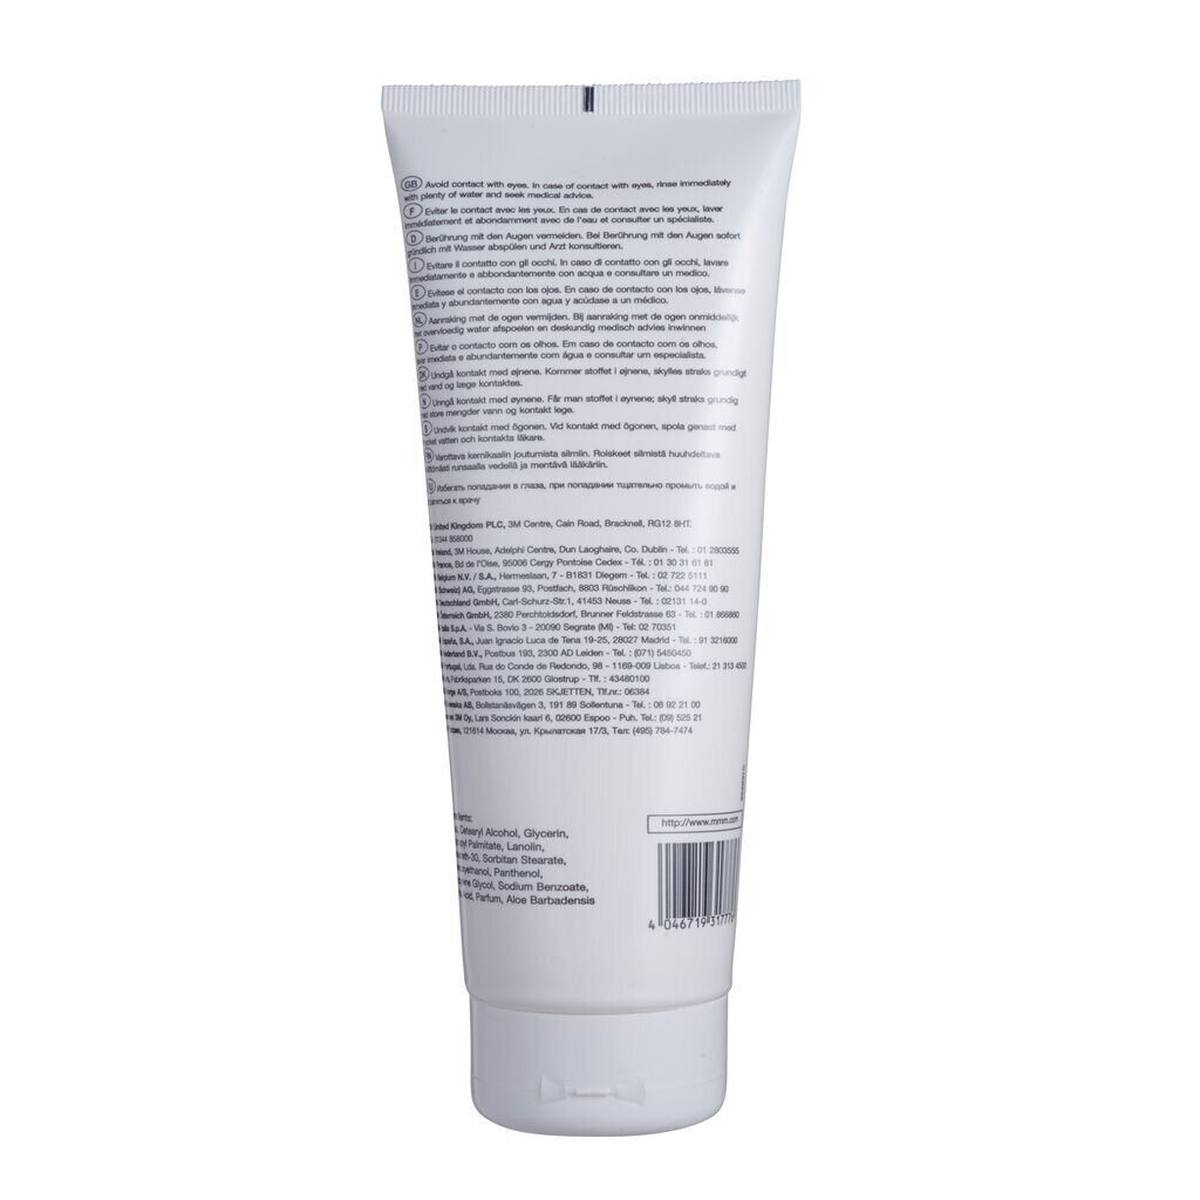 3M protection and care cream (tube), 250 ml #50367